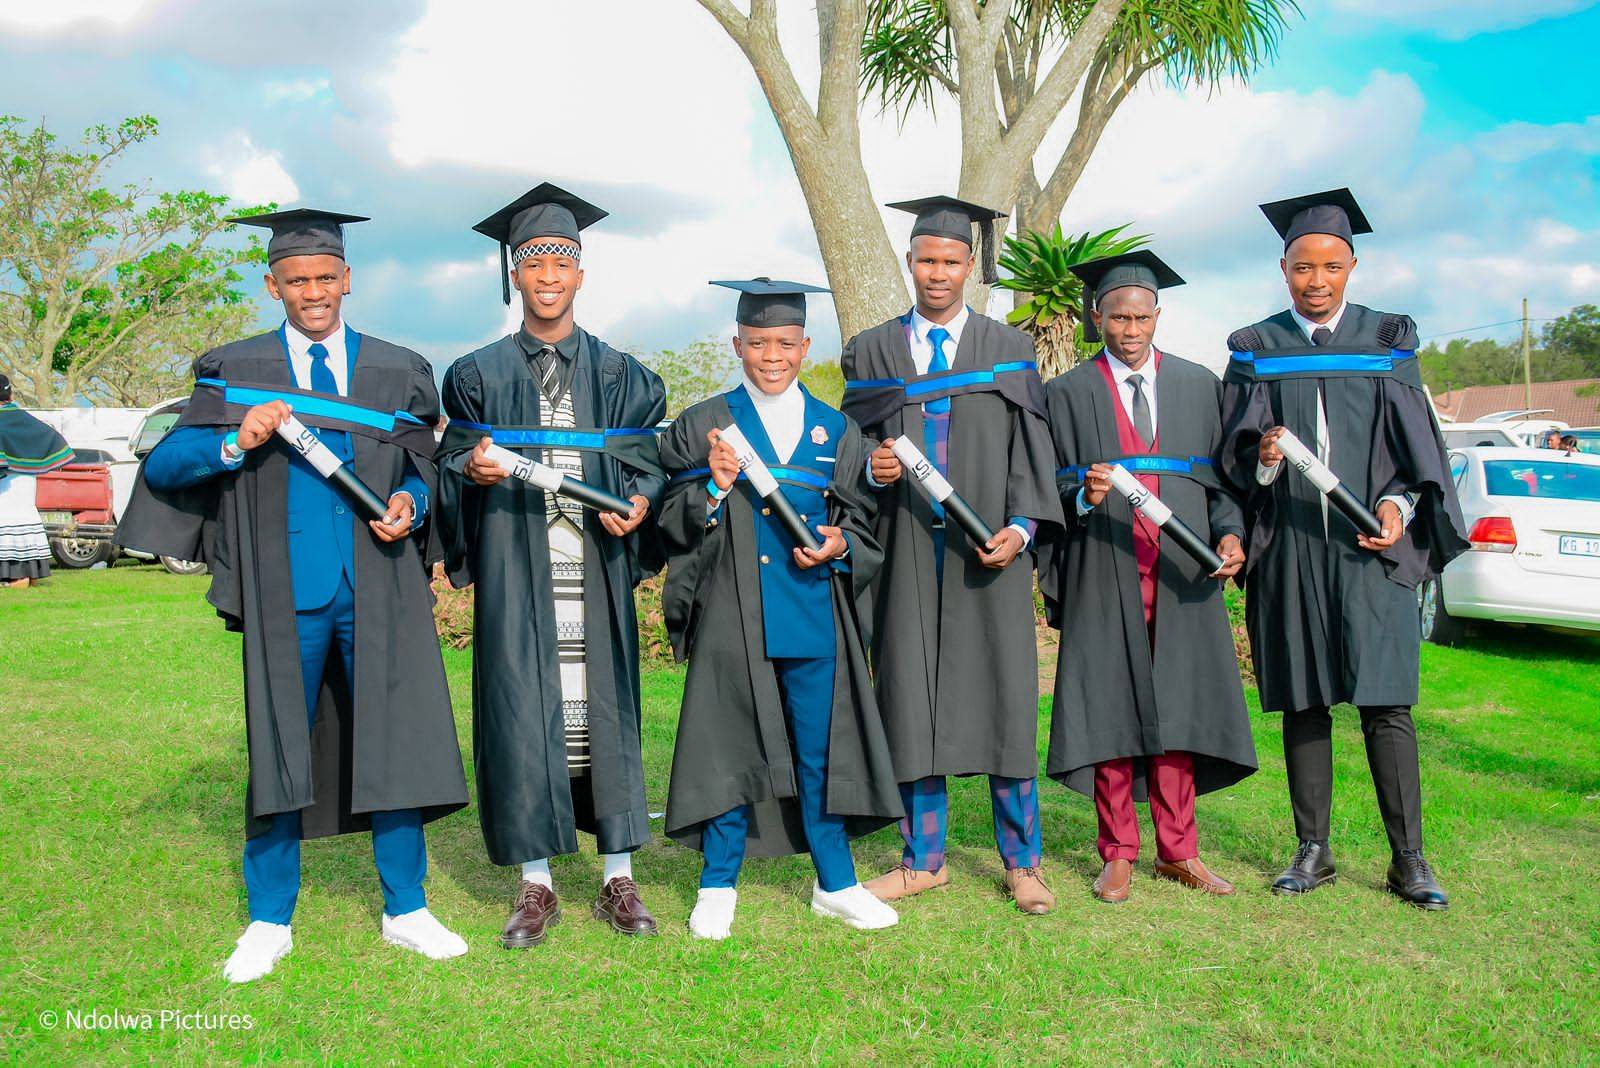 A MAGNIFICENT SEVEN HOW FRIENDS HELPED EACH OTHER GRADUATE